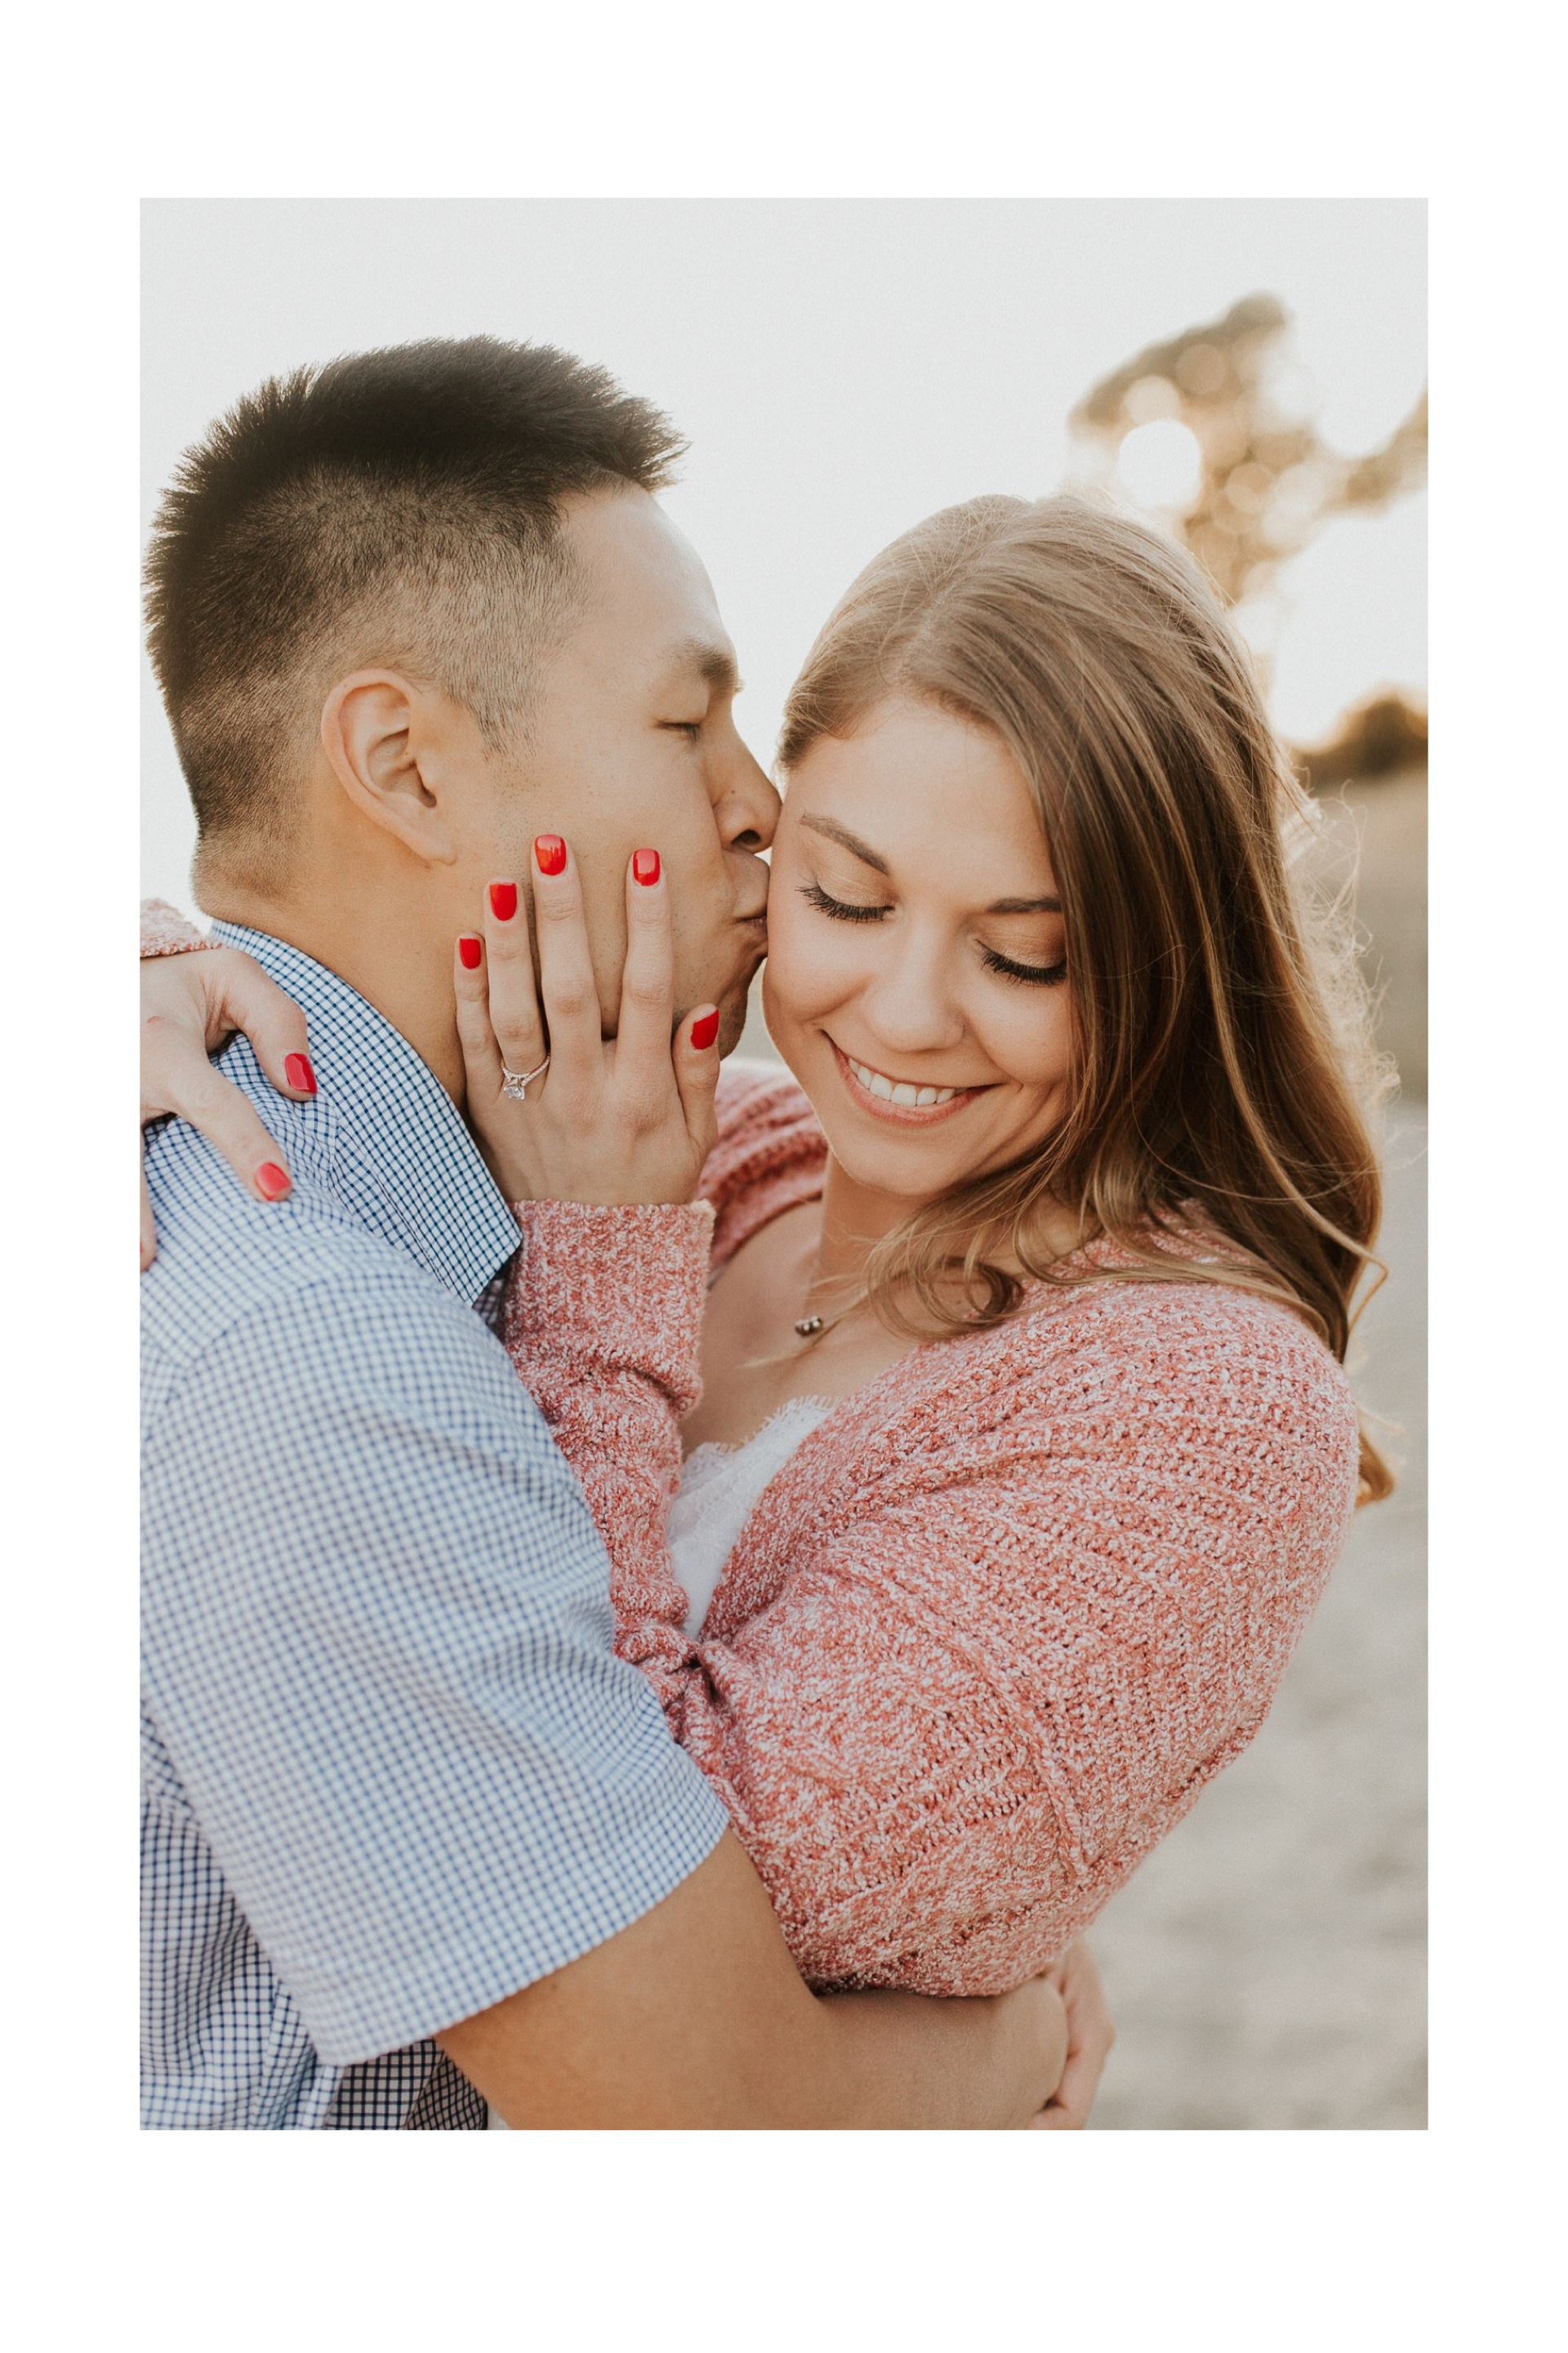 Sunset engagement shoot at Discovery Park, Seattle by Sarah Anne Photography